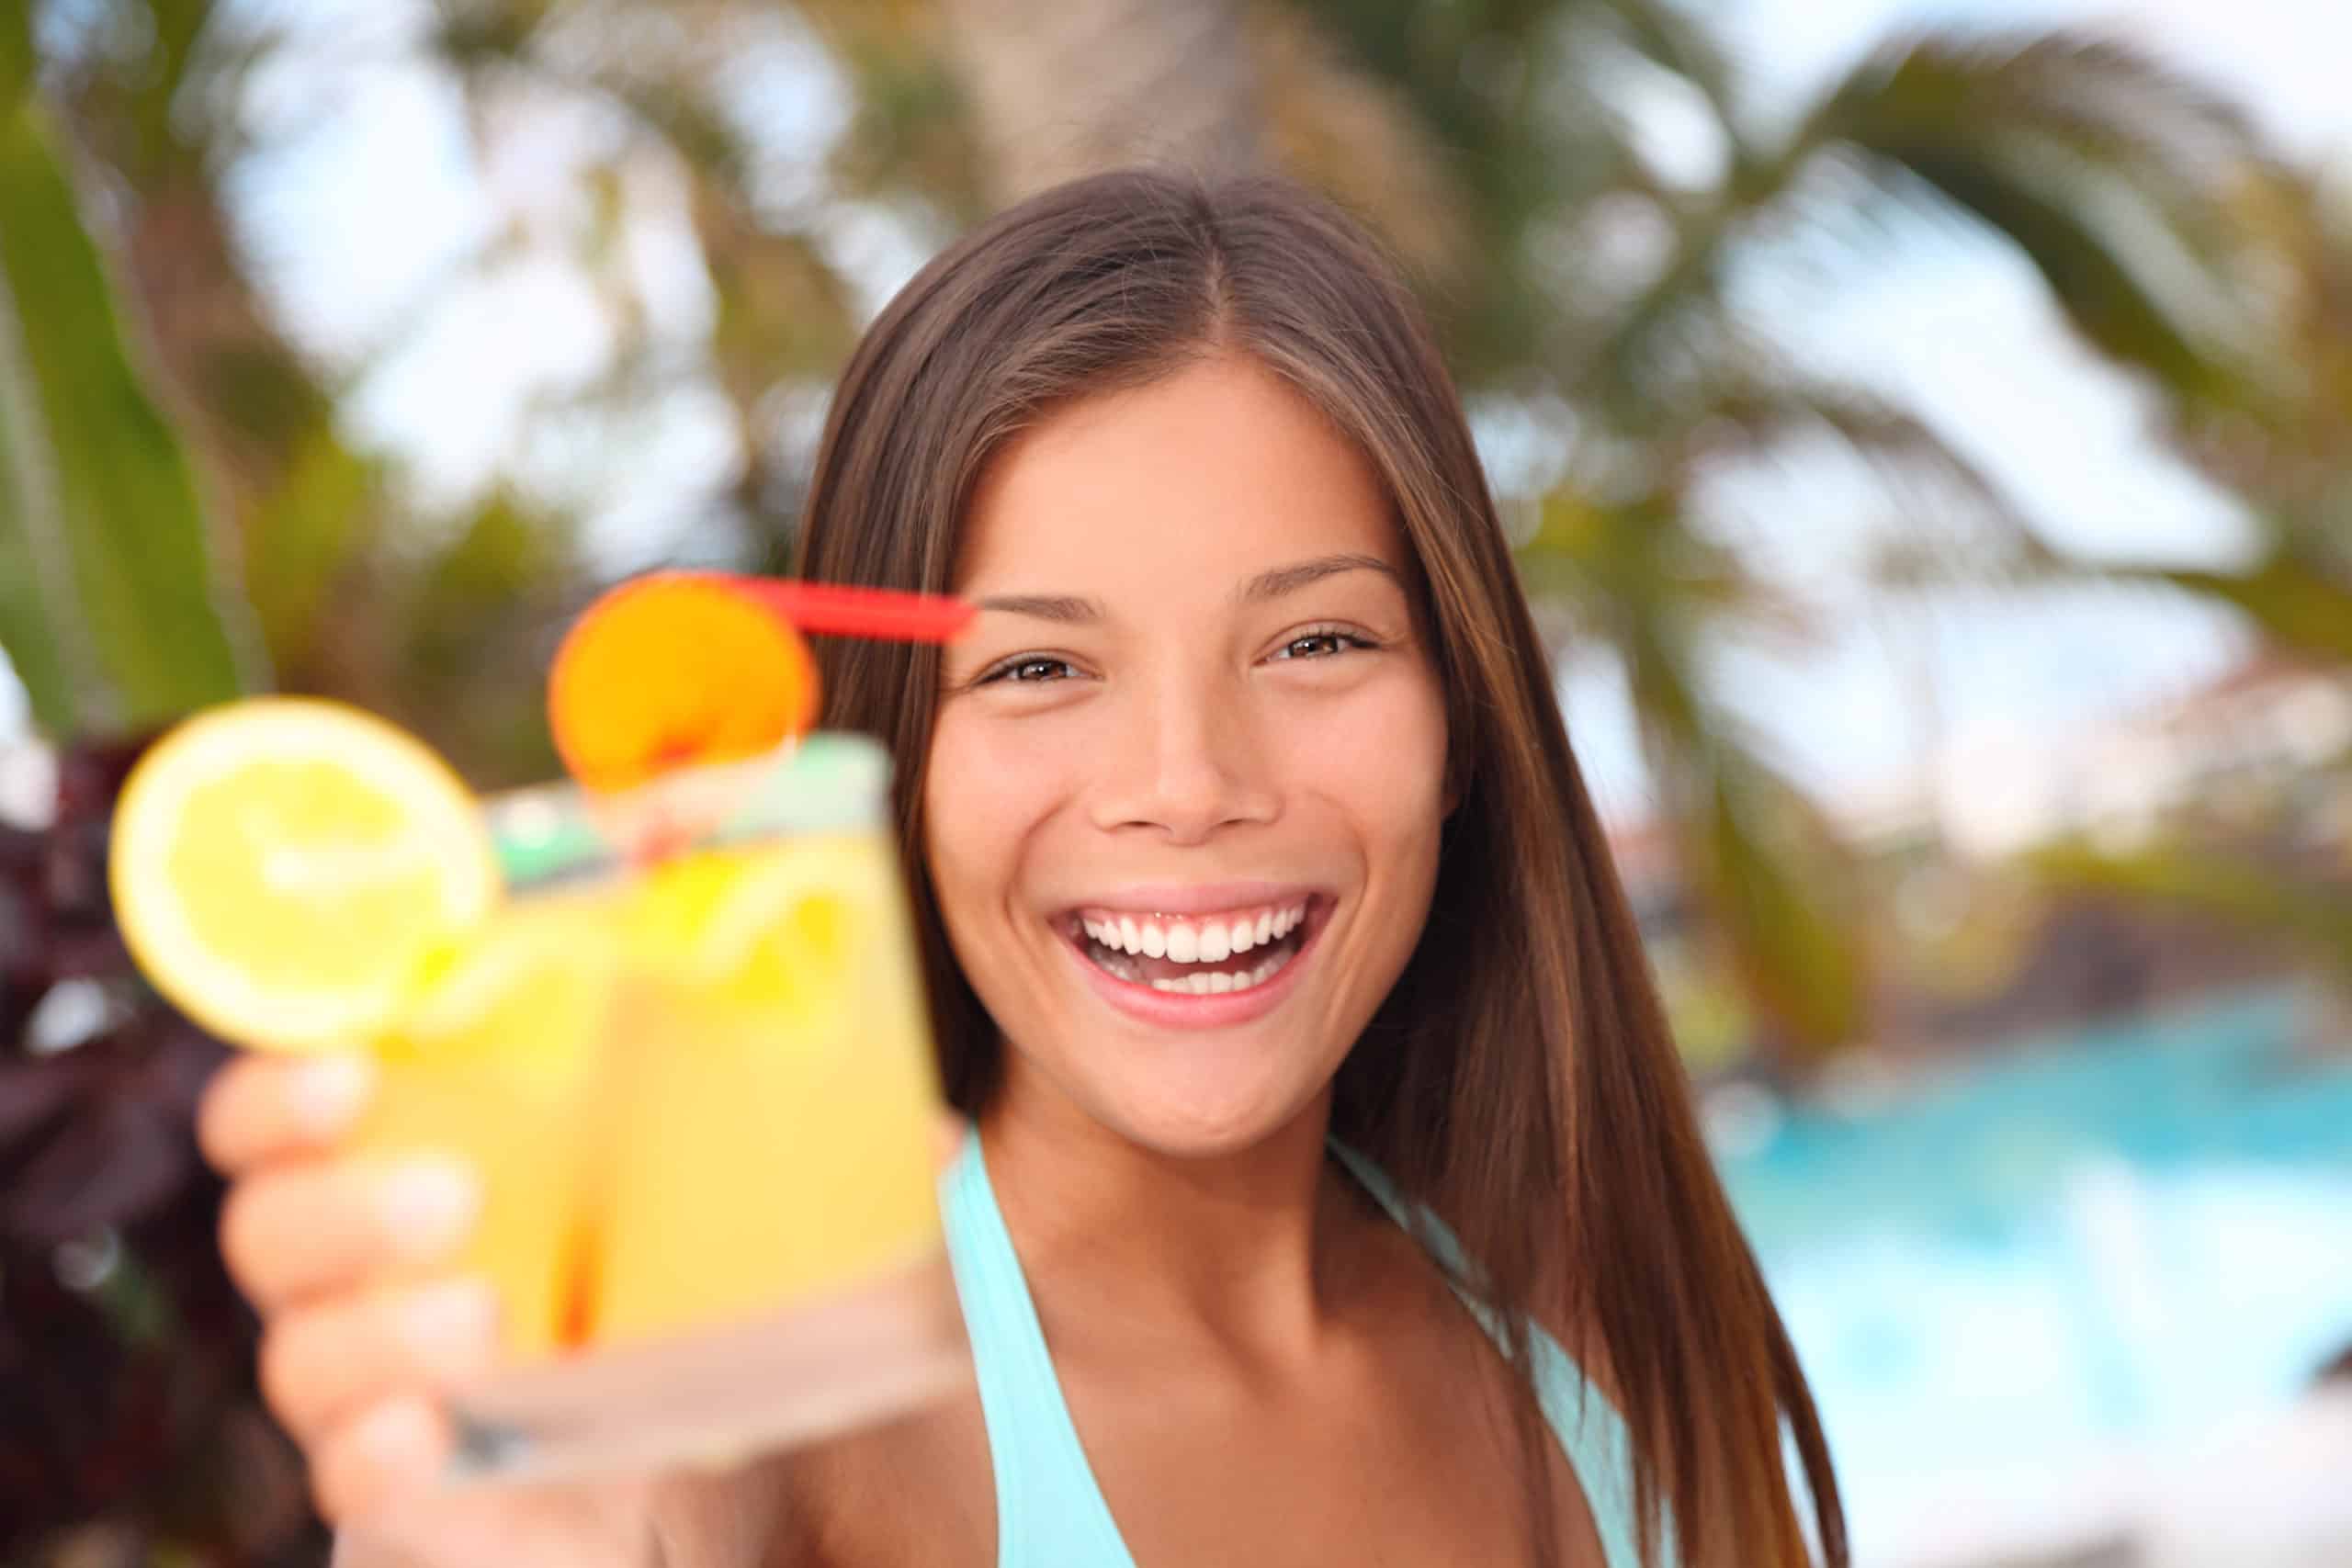 A woman with dark hair wearing a light blue swim suit holds a yellow, tropical drink as she is staying hydrated in her swimming pool.